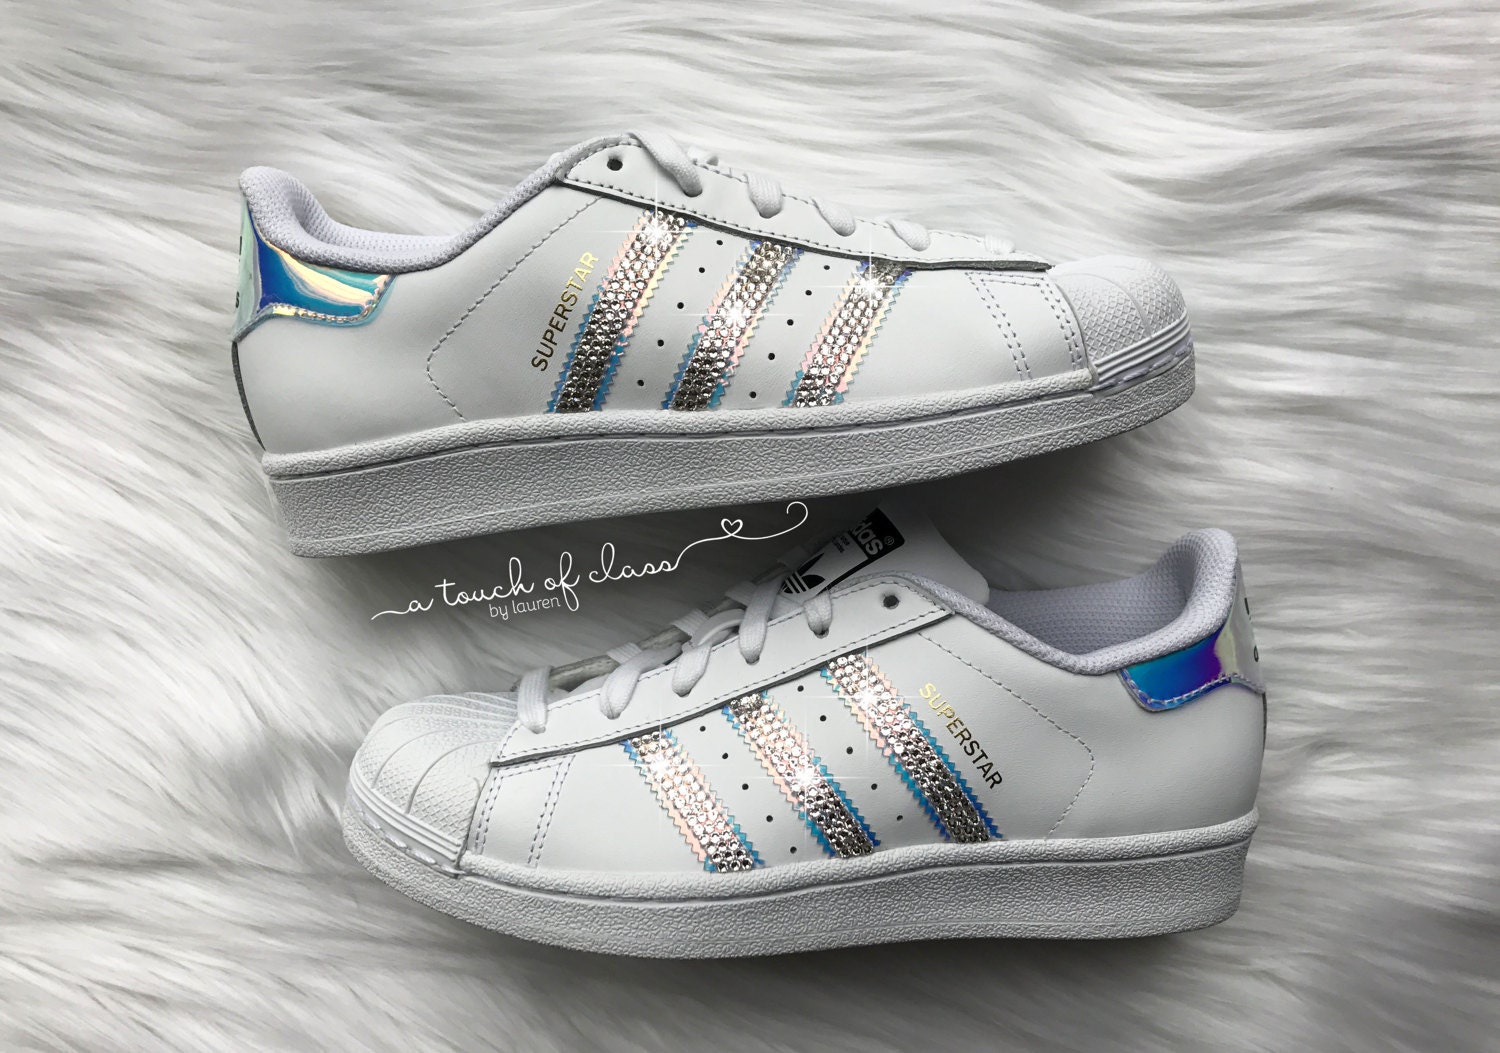 Adidas Superstar Girls Women's Shoes Customized with